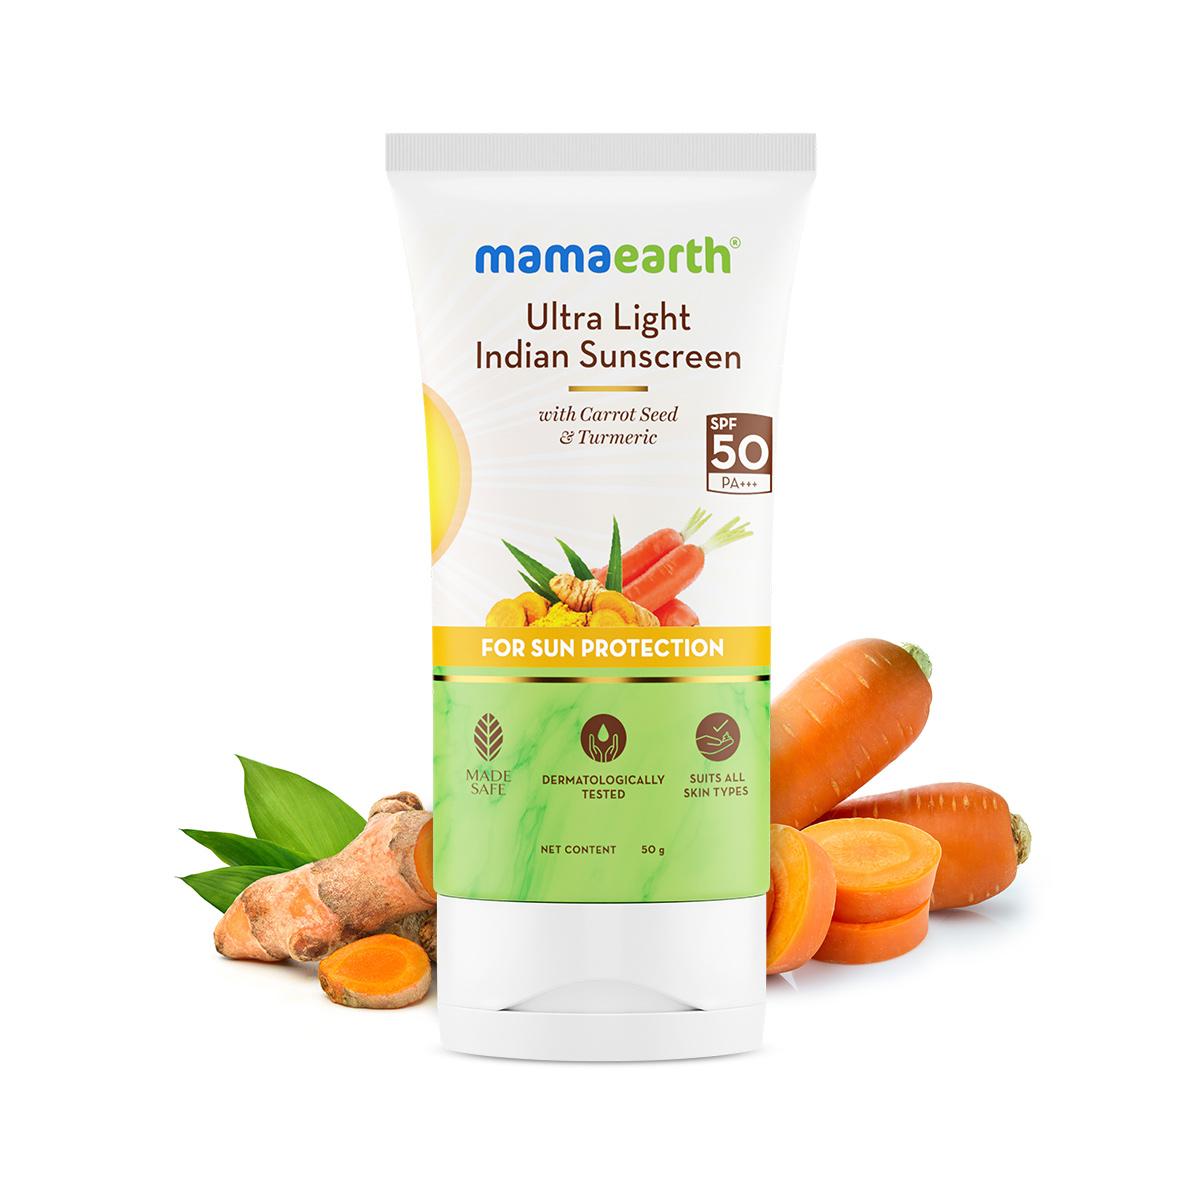 ultra light indian sunscreen with carrot seed, turmeric, and spf 50 pa+++ - 50 g